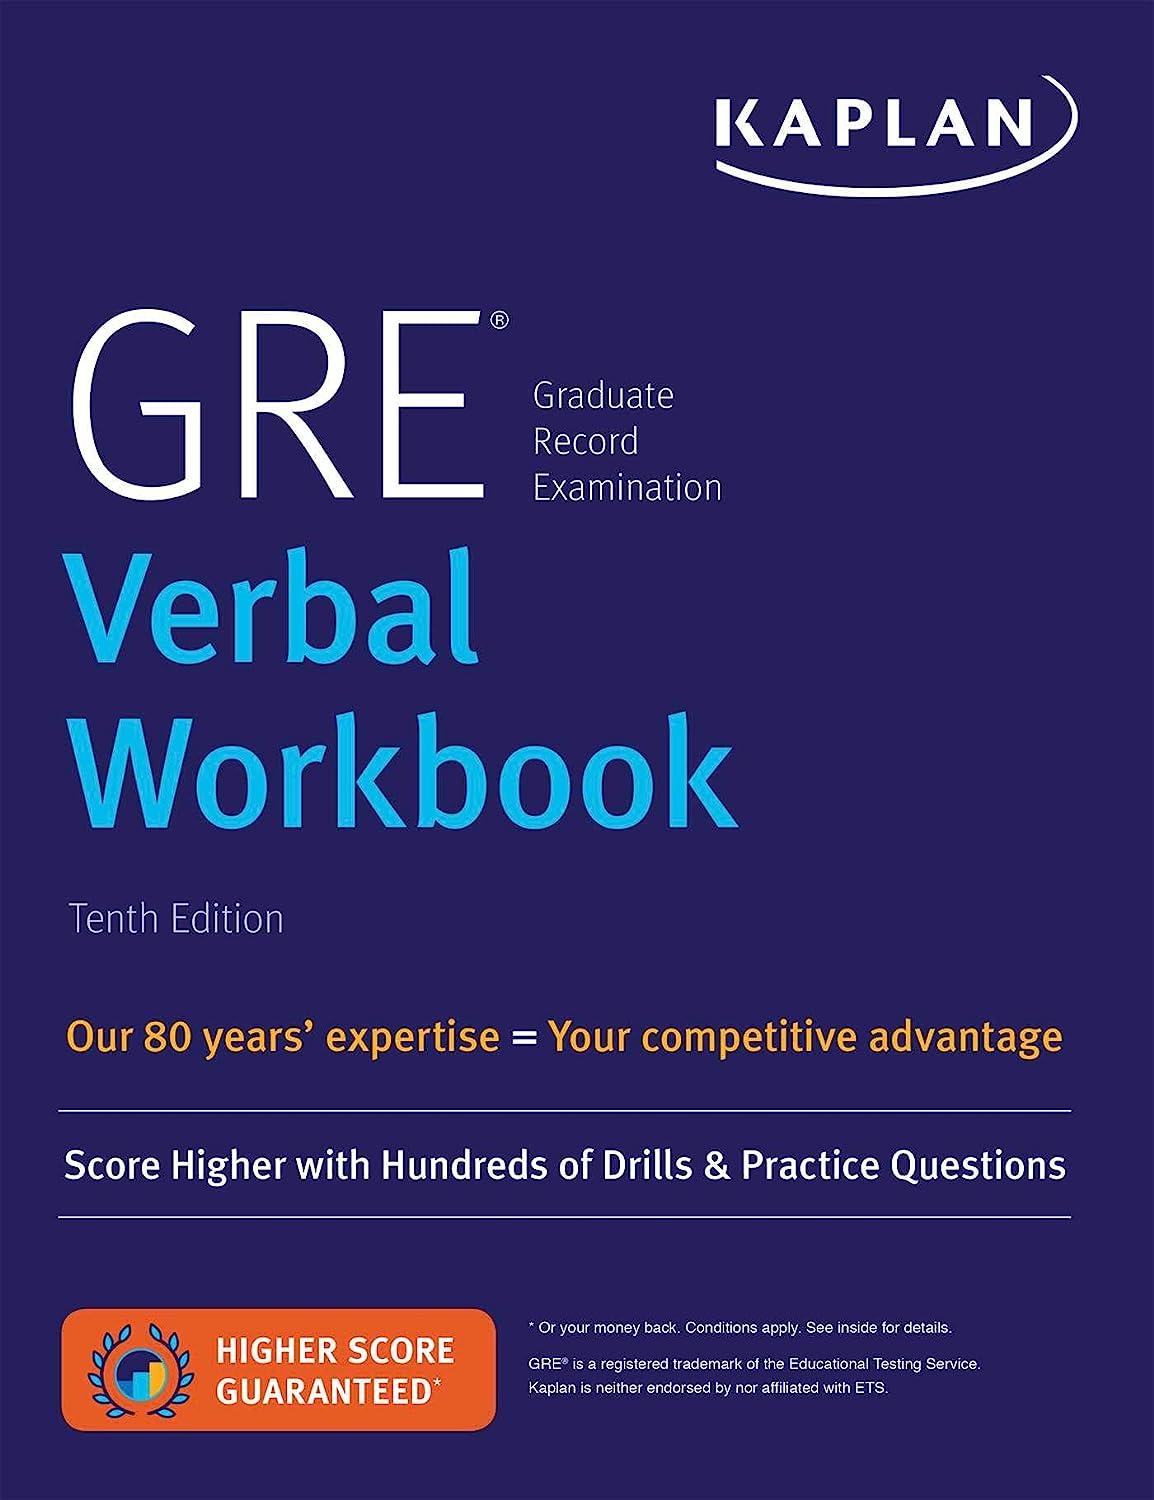 GRE Verbal Workbook Score Higher With Hundreds Of Drills And Practice Questions